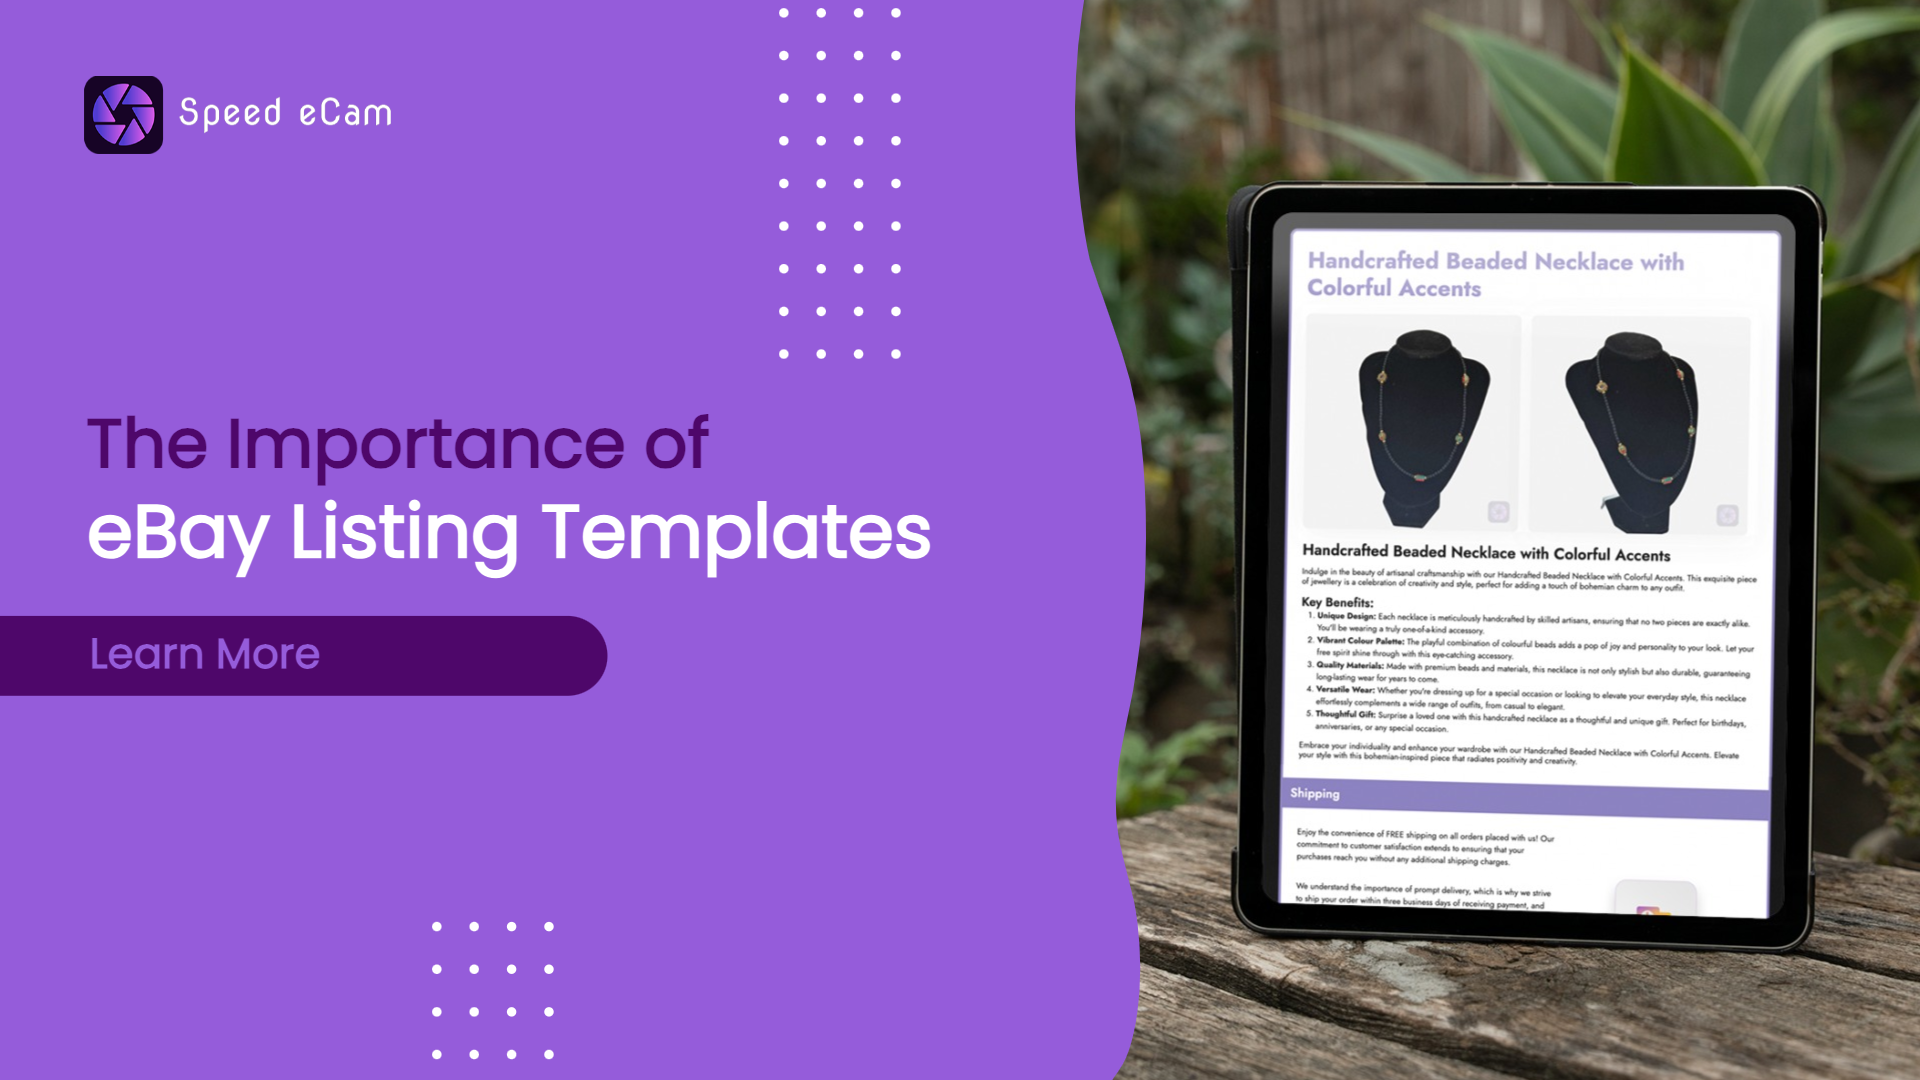 Understanding the Importance of eBay Listing Templates